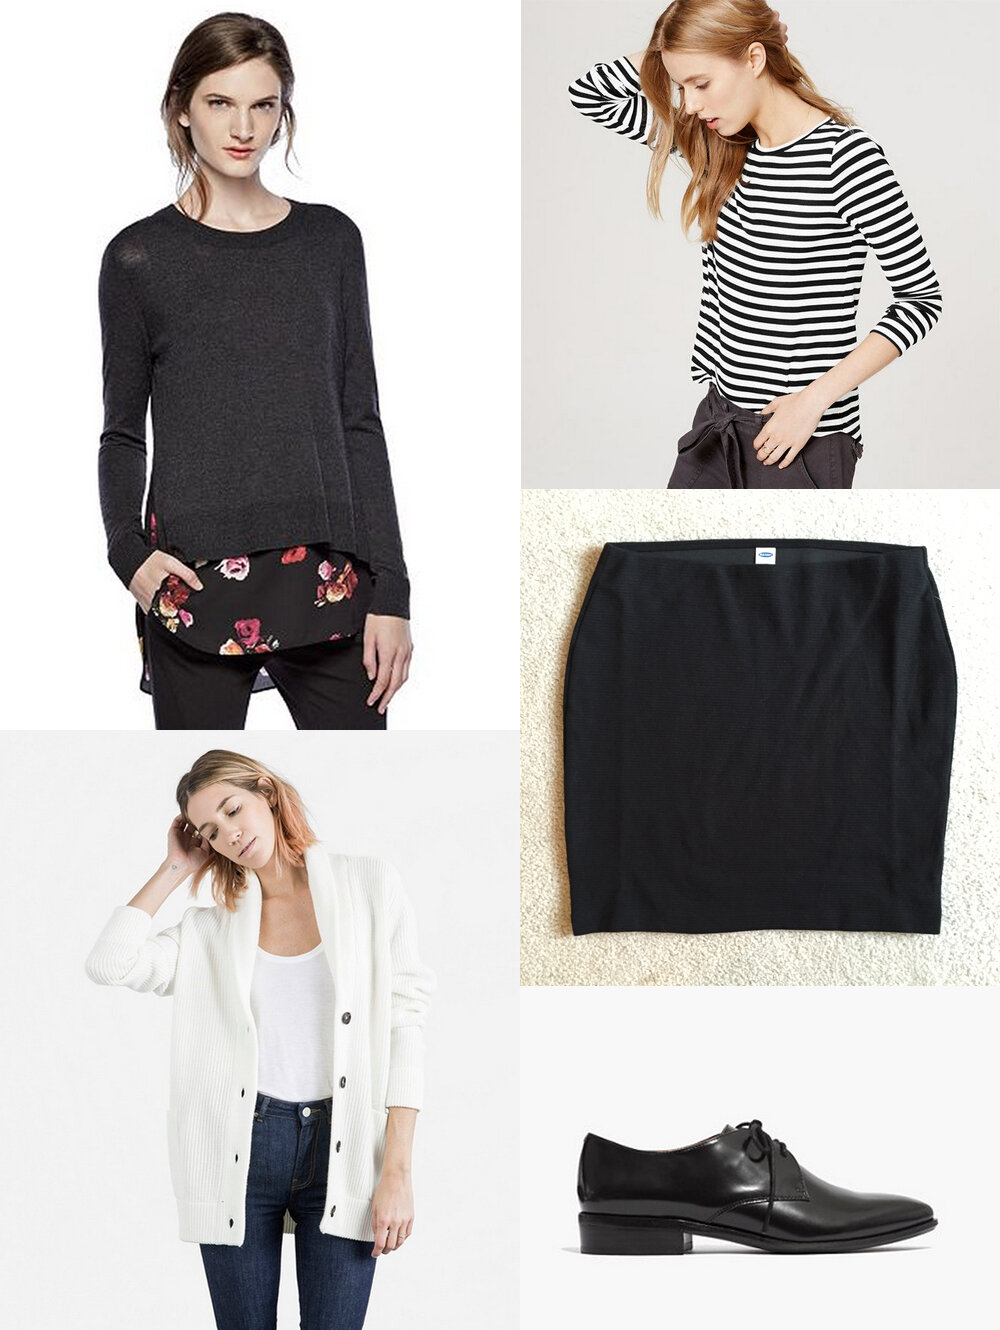 An analysis of past fall purchases: October 2015 — Cotton Cashmere Cat Hair